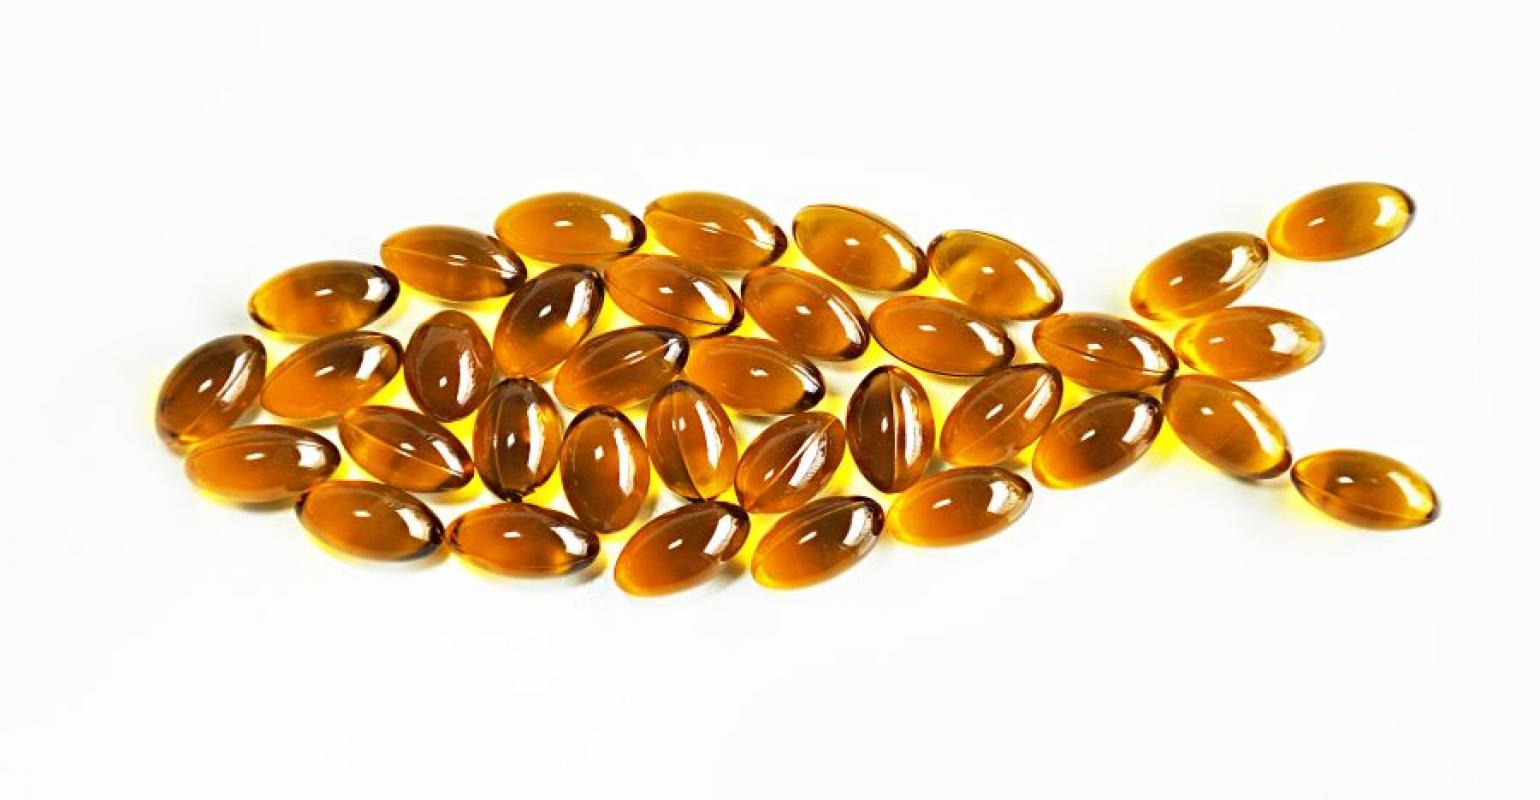 Fish oil Market Global Key Players, Trends, Share, Industry Size, Growth, Opportunities, Forecast To 2024